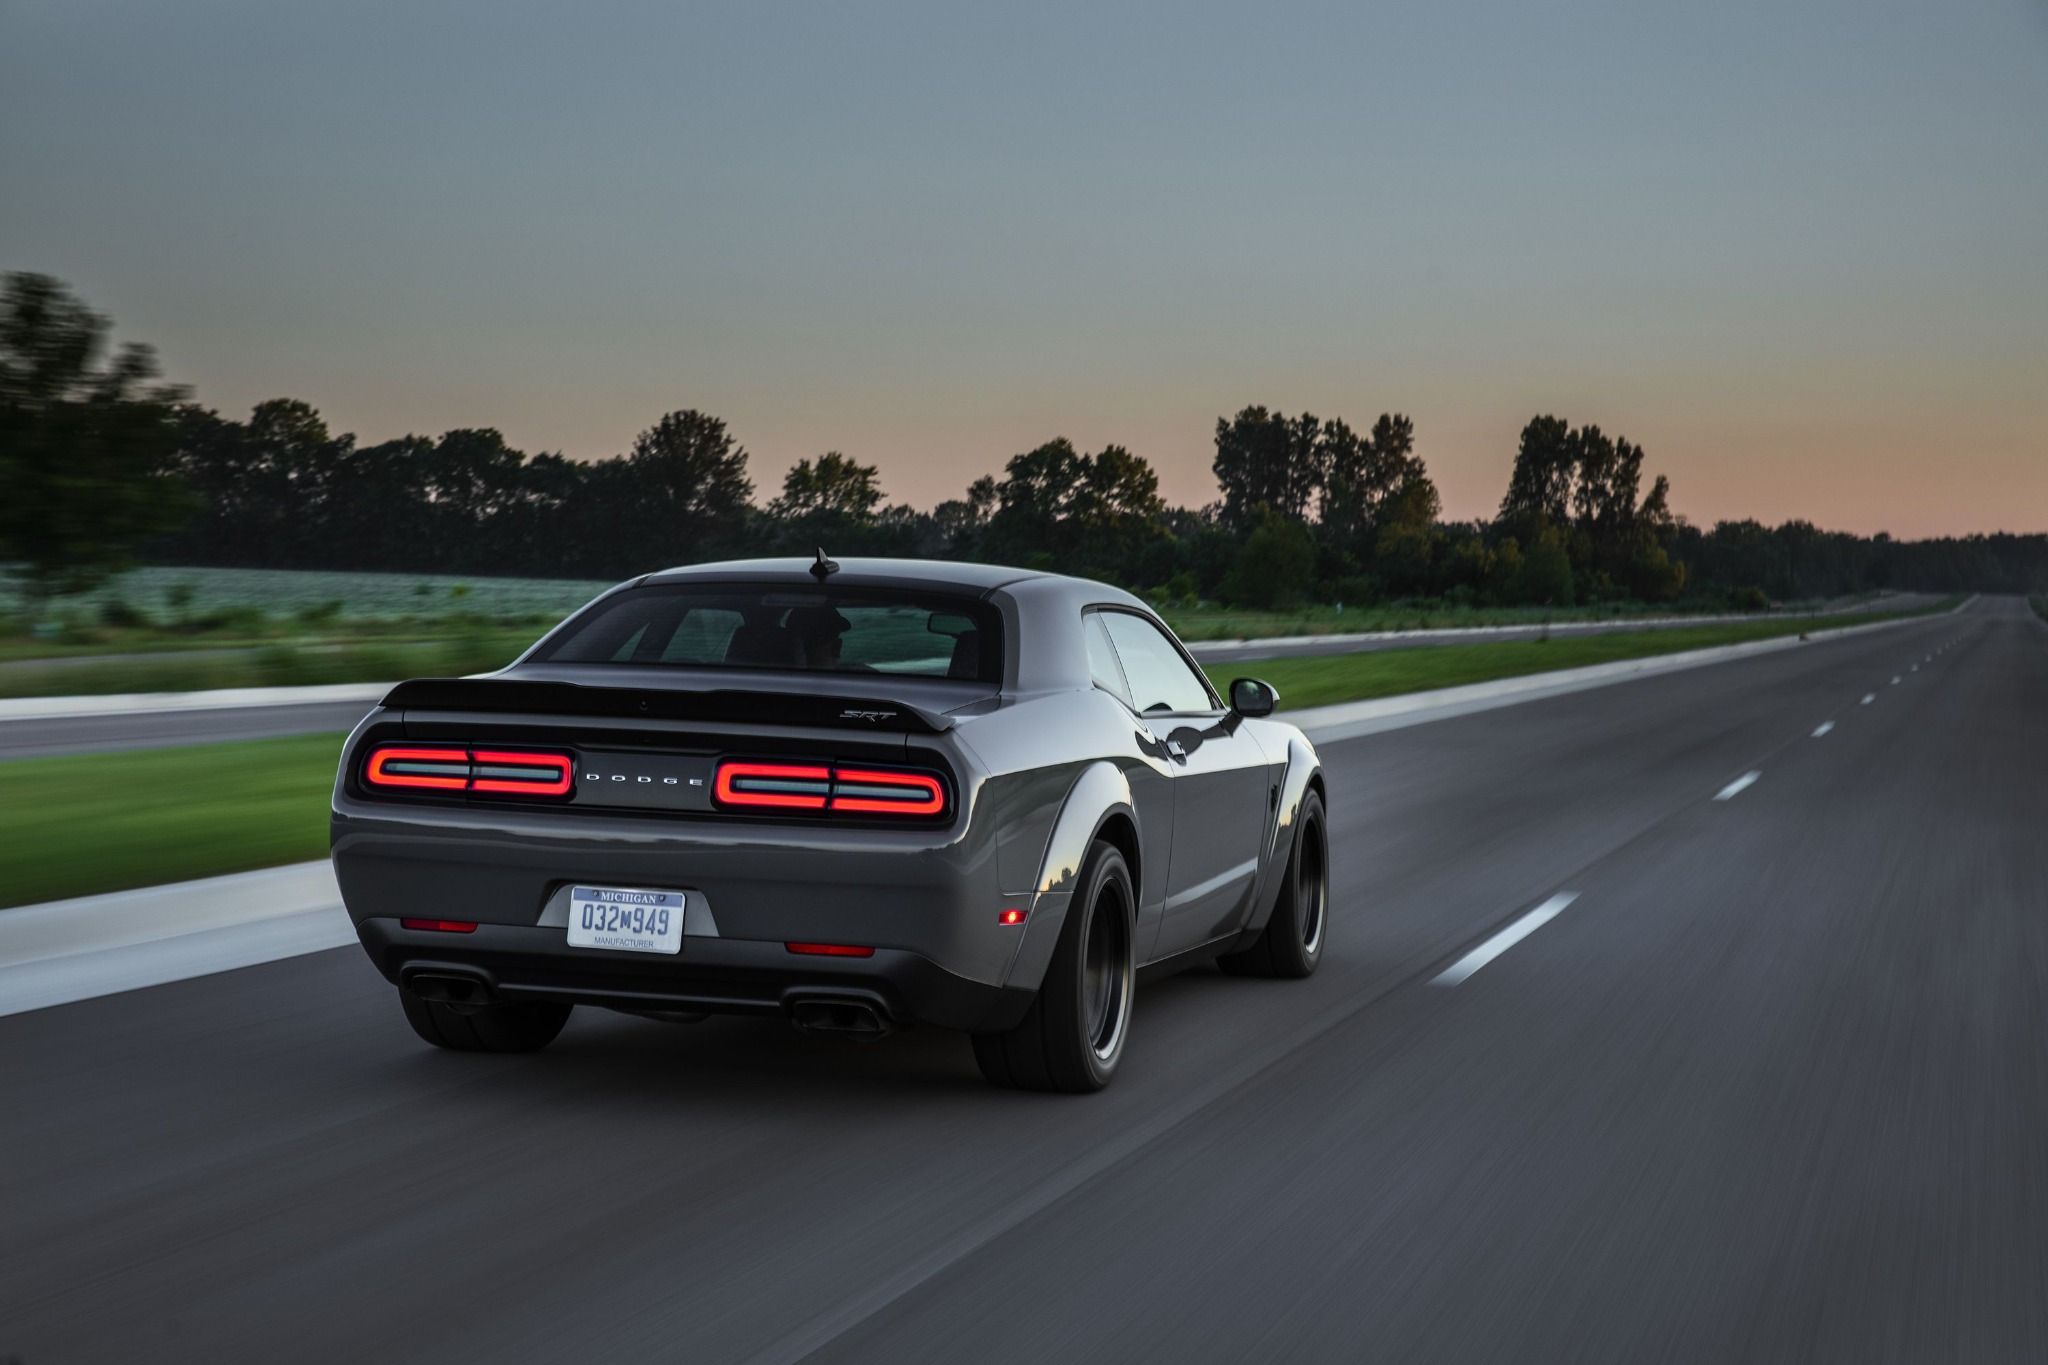 Rear view of a Dodge SRT Hellcat driving down a road